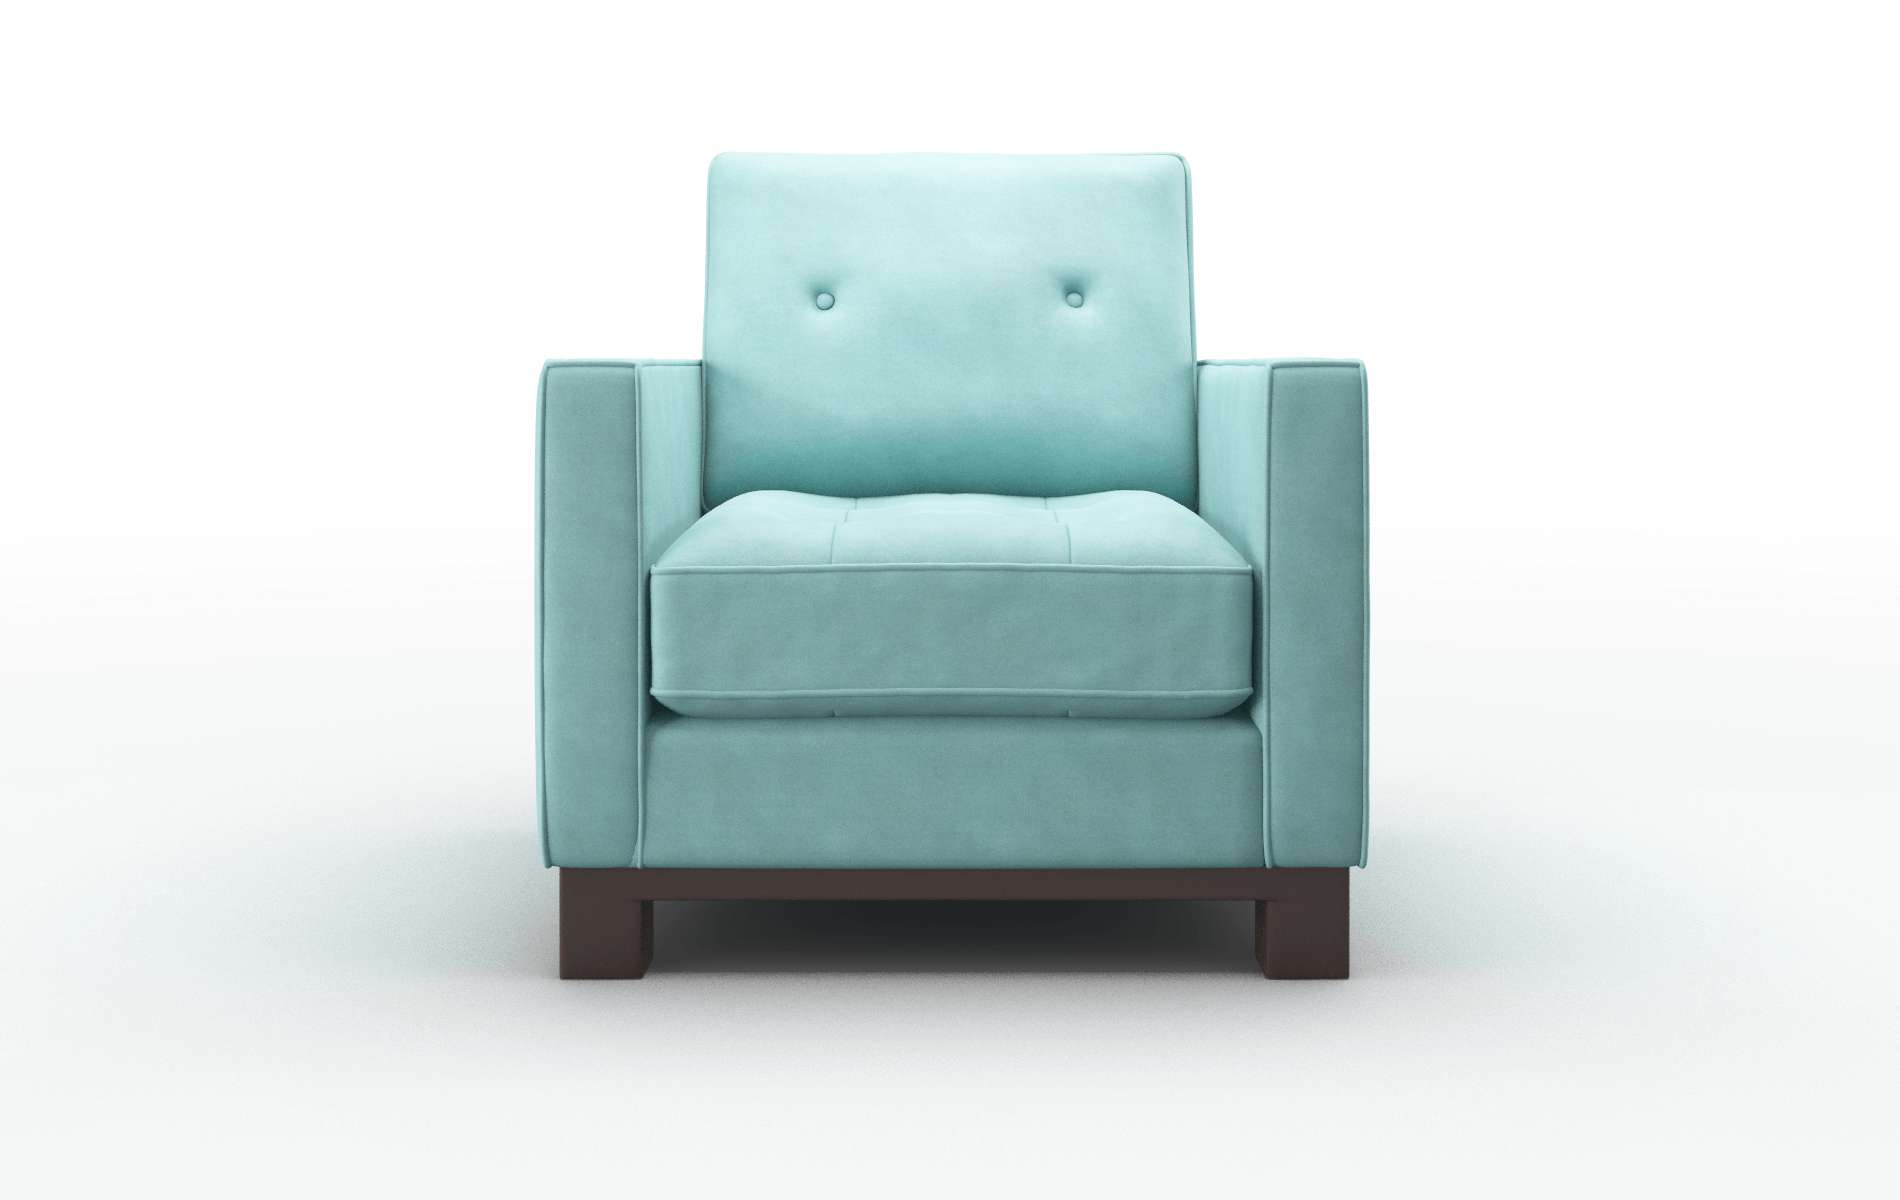 Syros Curious Turquoise Chair espresso legs 1